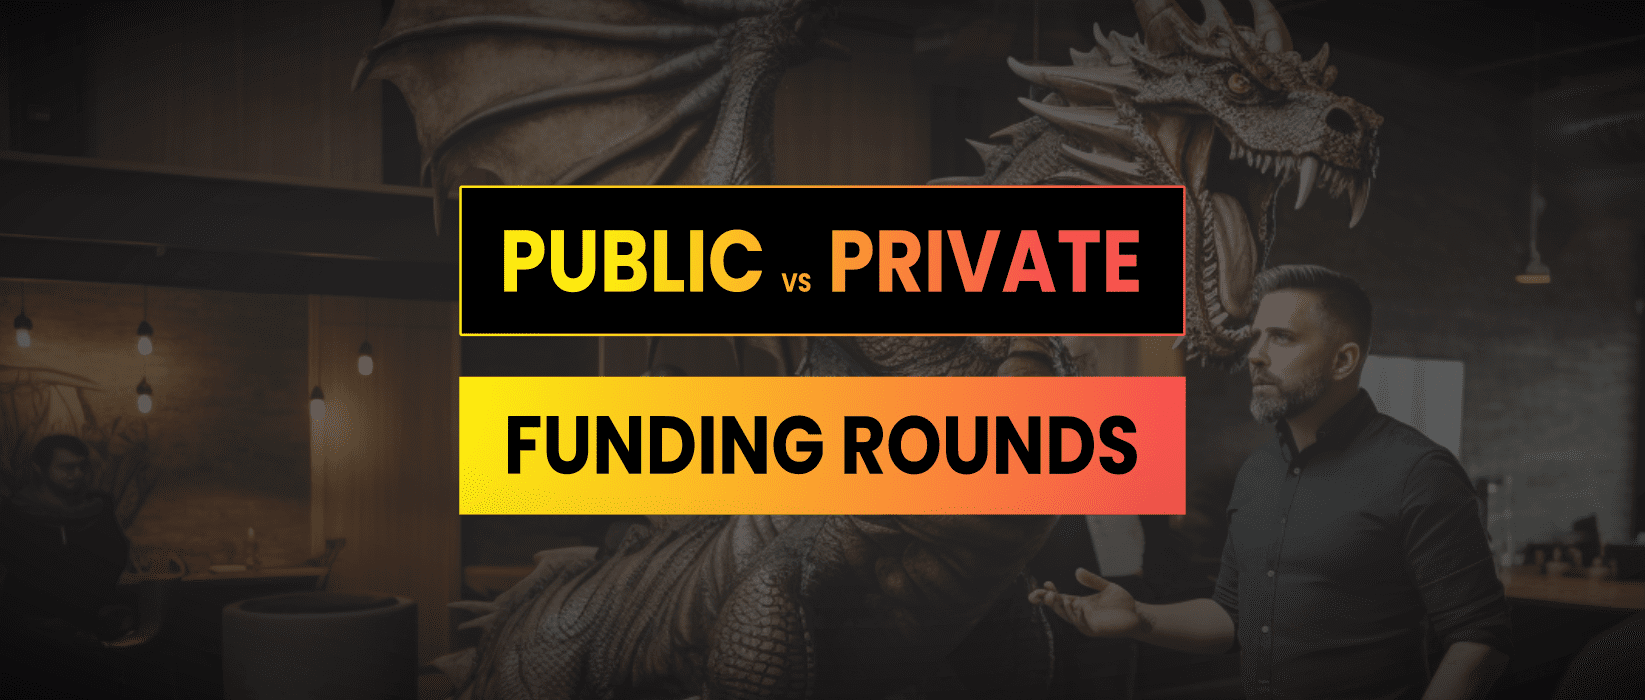 FUNDING ROUNDS